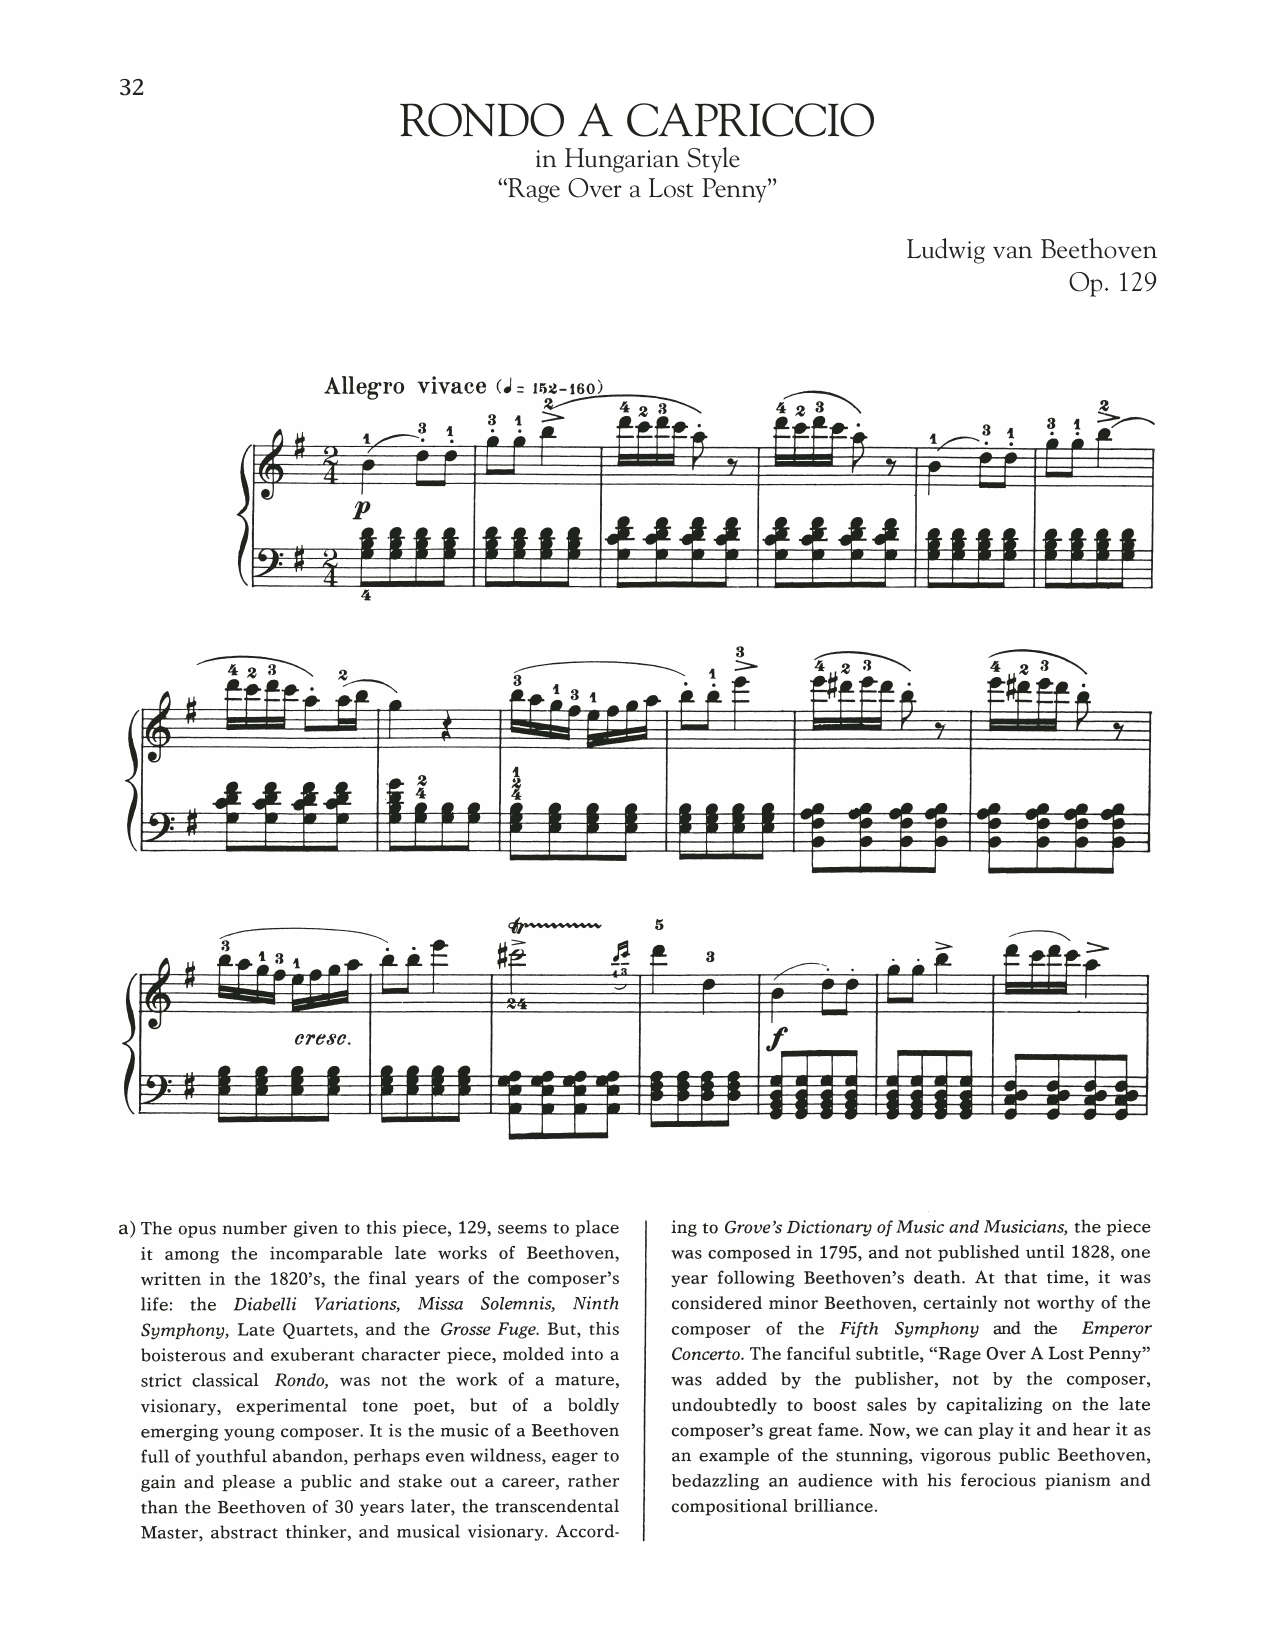 Ludwig van Beethoven Rondo A Capriccio In Hungarian Style, Op. 129 sheet music notes printable PDF score